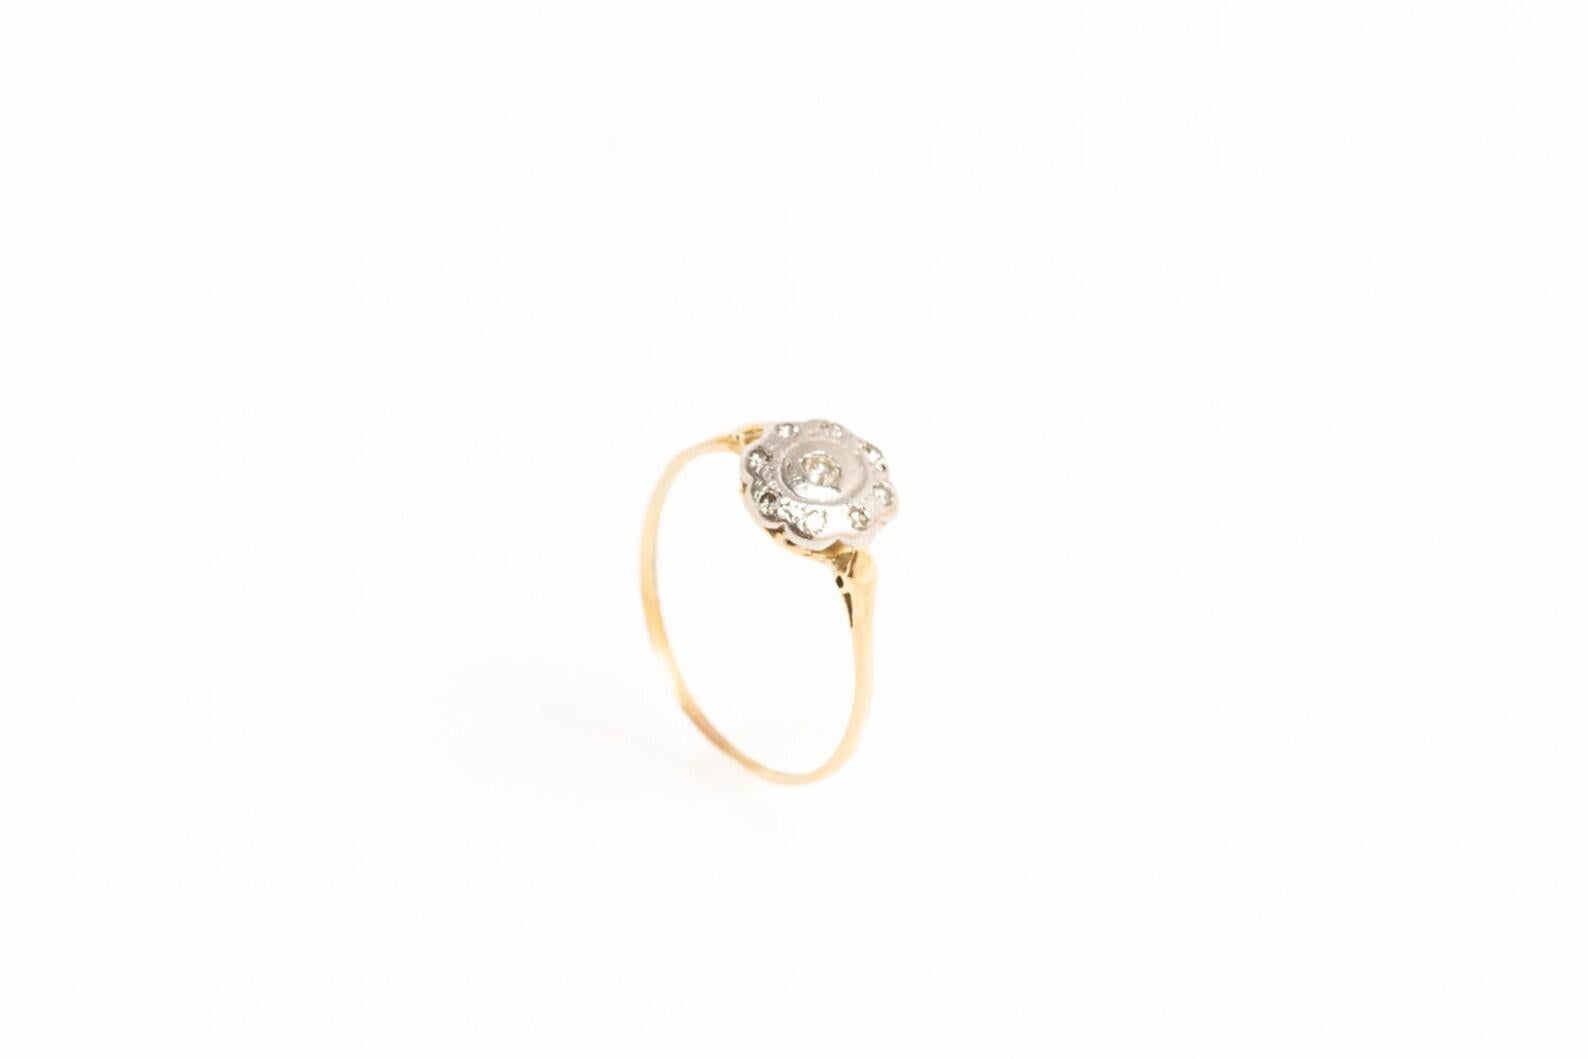 Antique Art Deco 18ct Gold Diamond Daisy Ring In Good Condition For Sale In Portland, GB